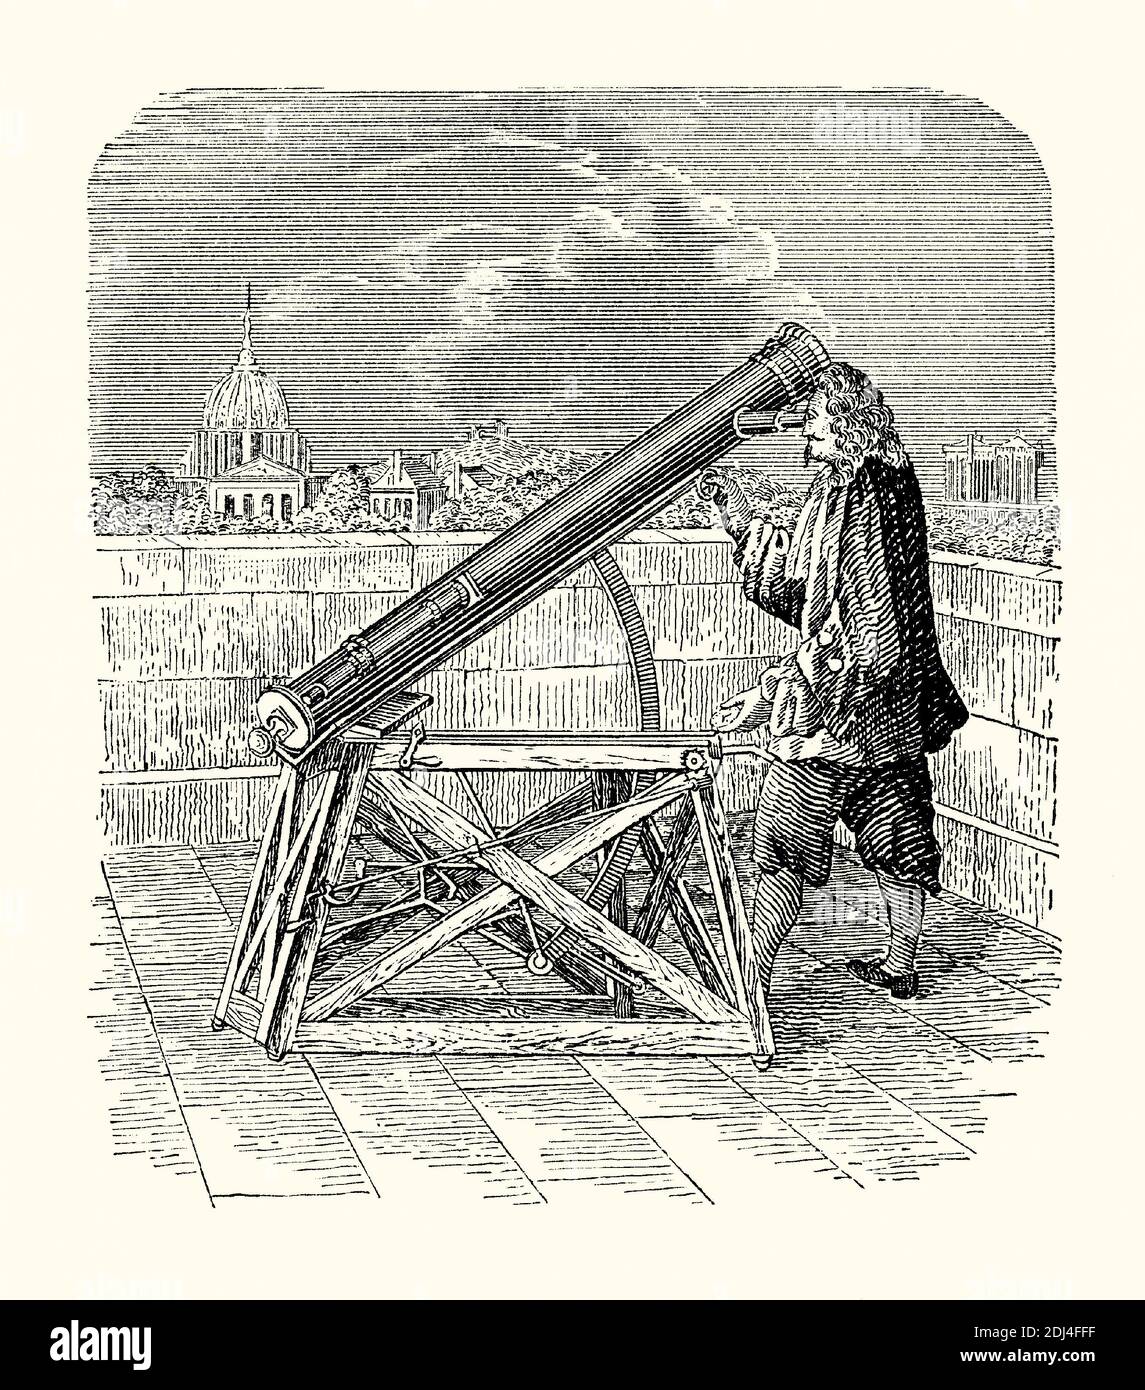 An Old Engraving Showing Isaac Newton And His Reflecting Telescope London England Uk C 1670 9959